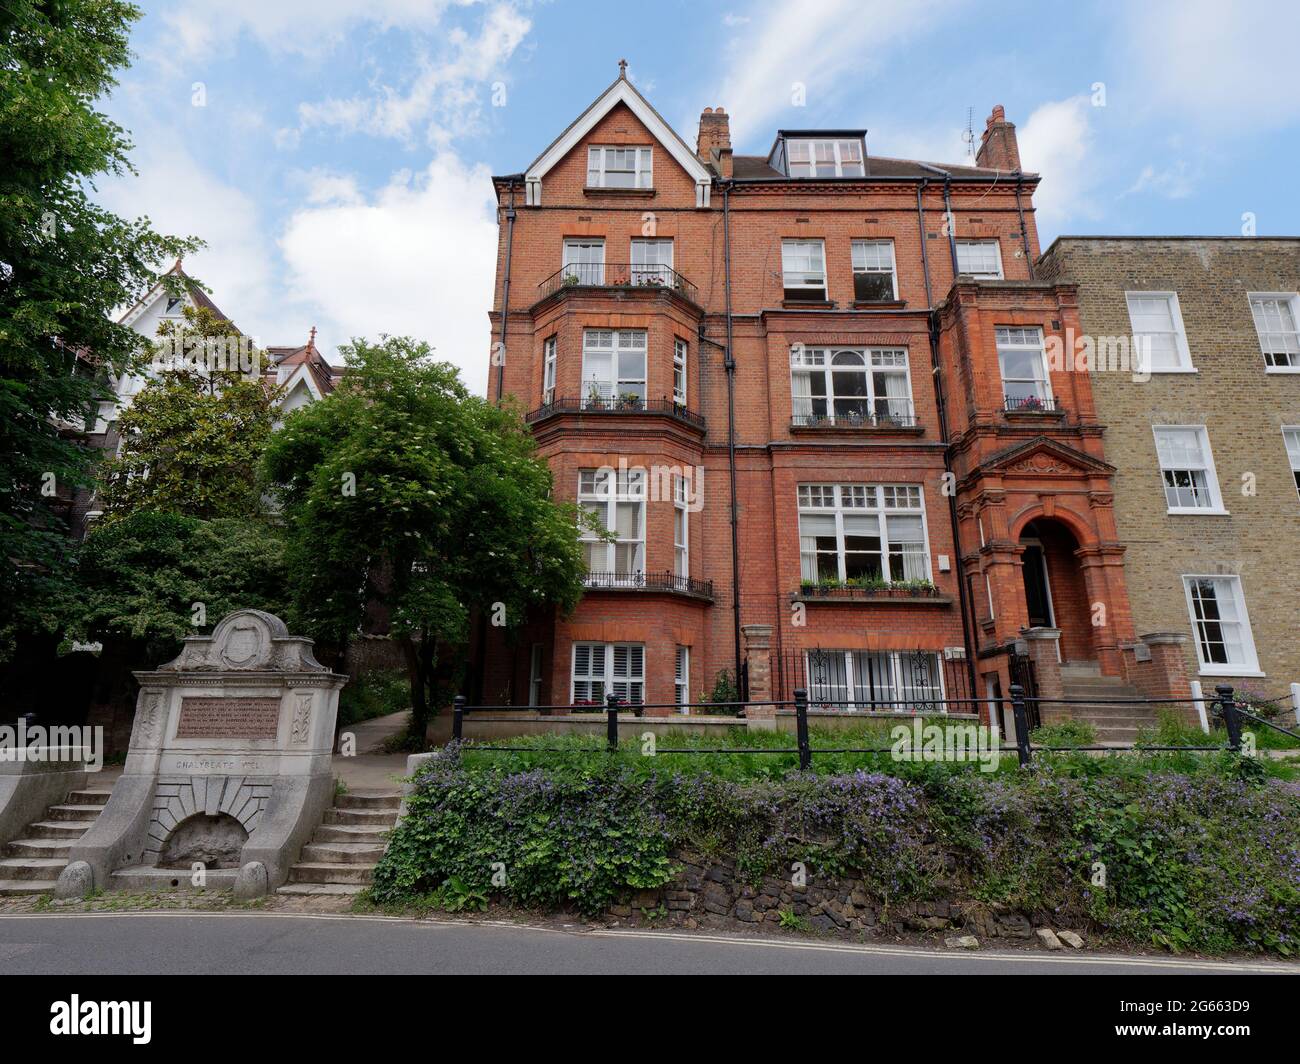 London, Greater London, England - June 26 2021:  The chalybeate springs of Hampstead, known as Hampstead Well next to a large residential property. Stock Photo